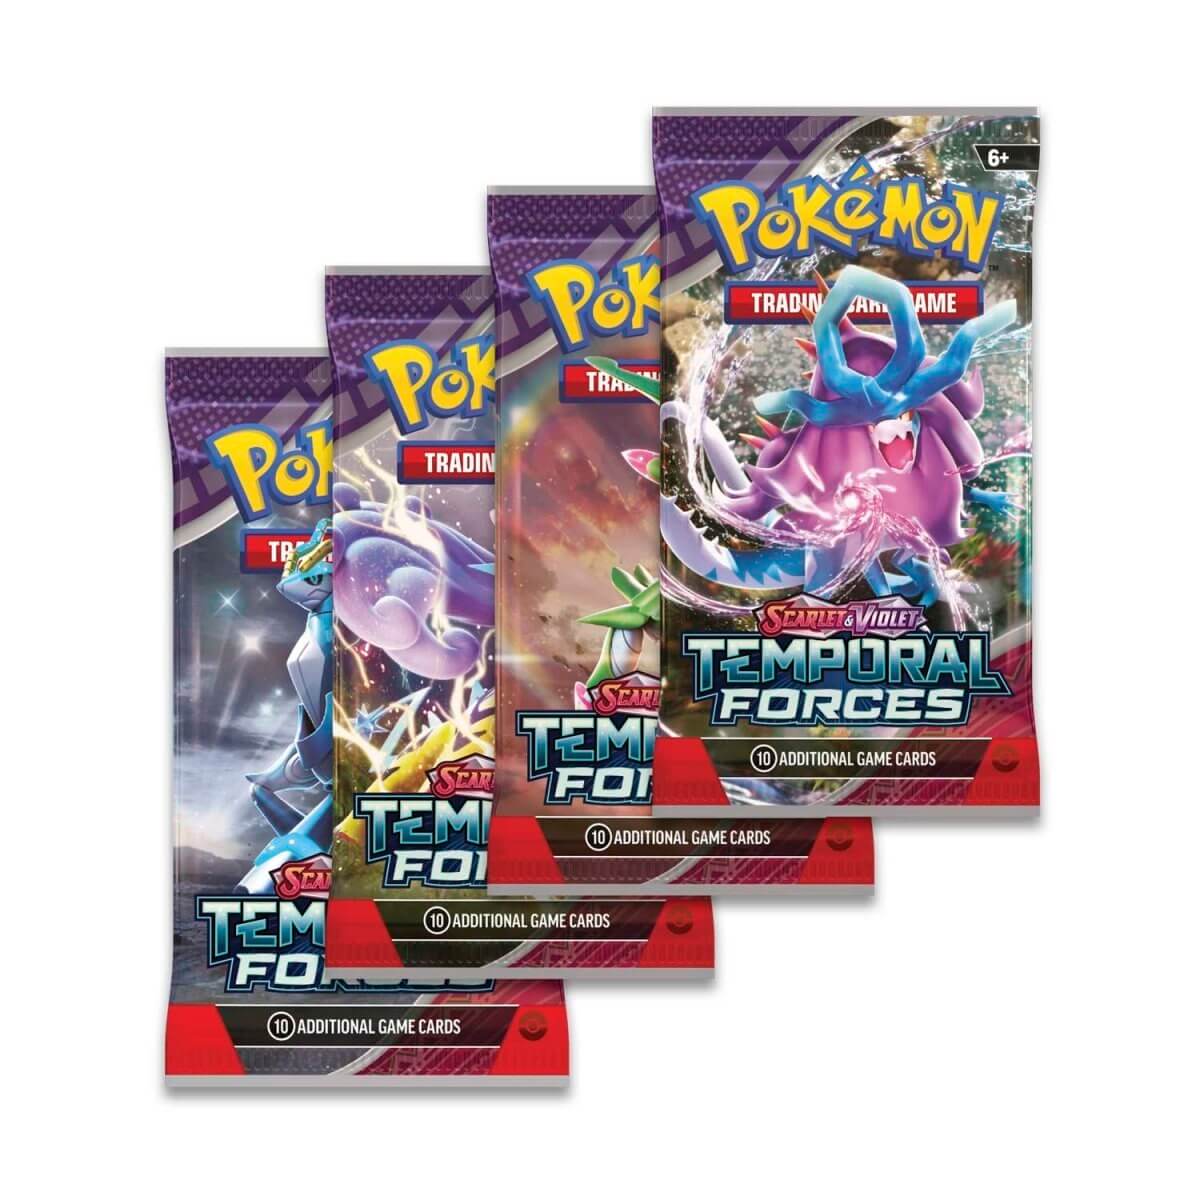 Pokemon_temporal_forces_booster_box_balicky